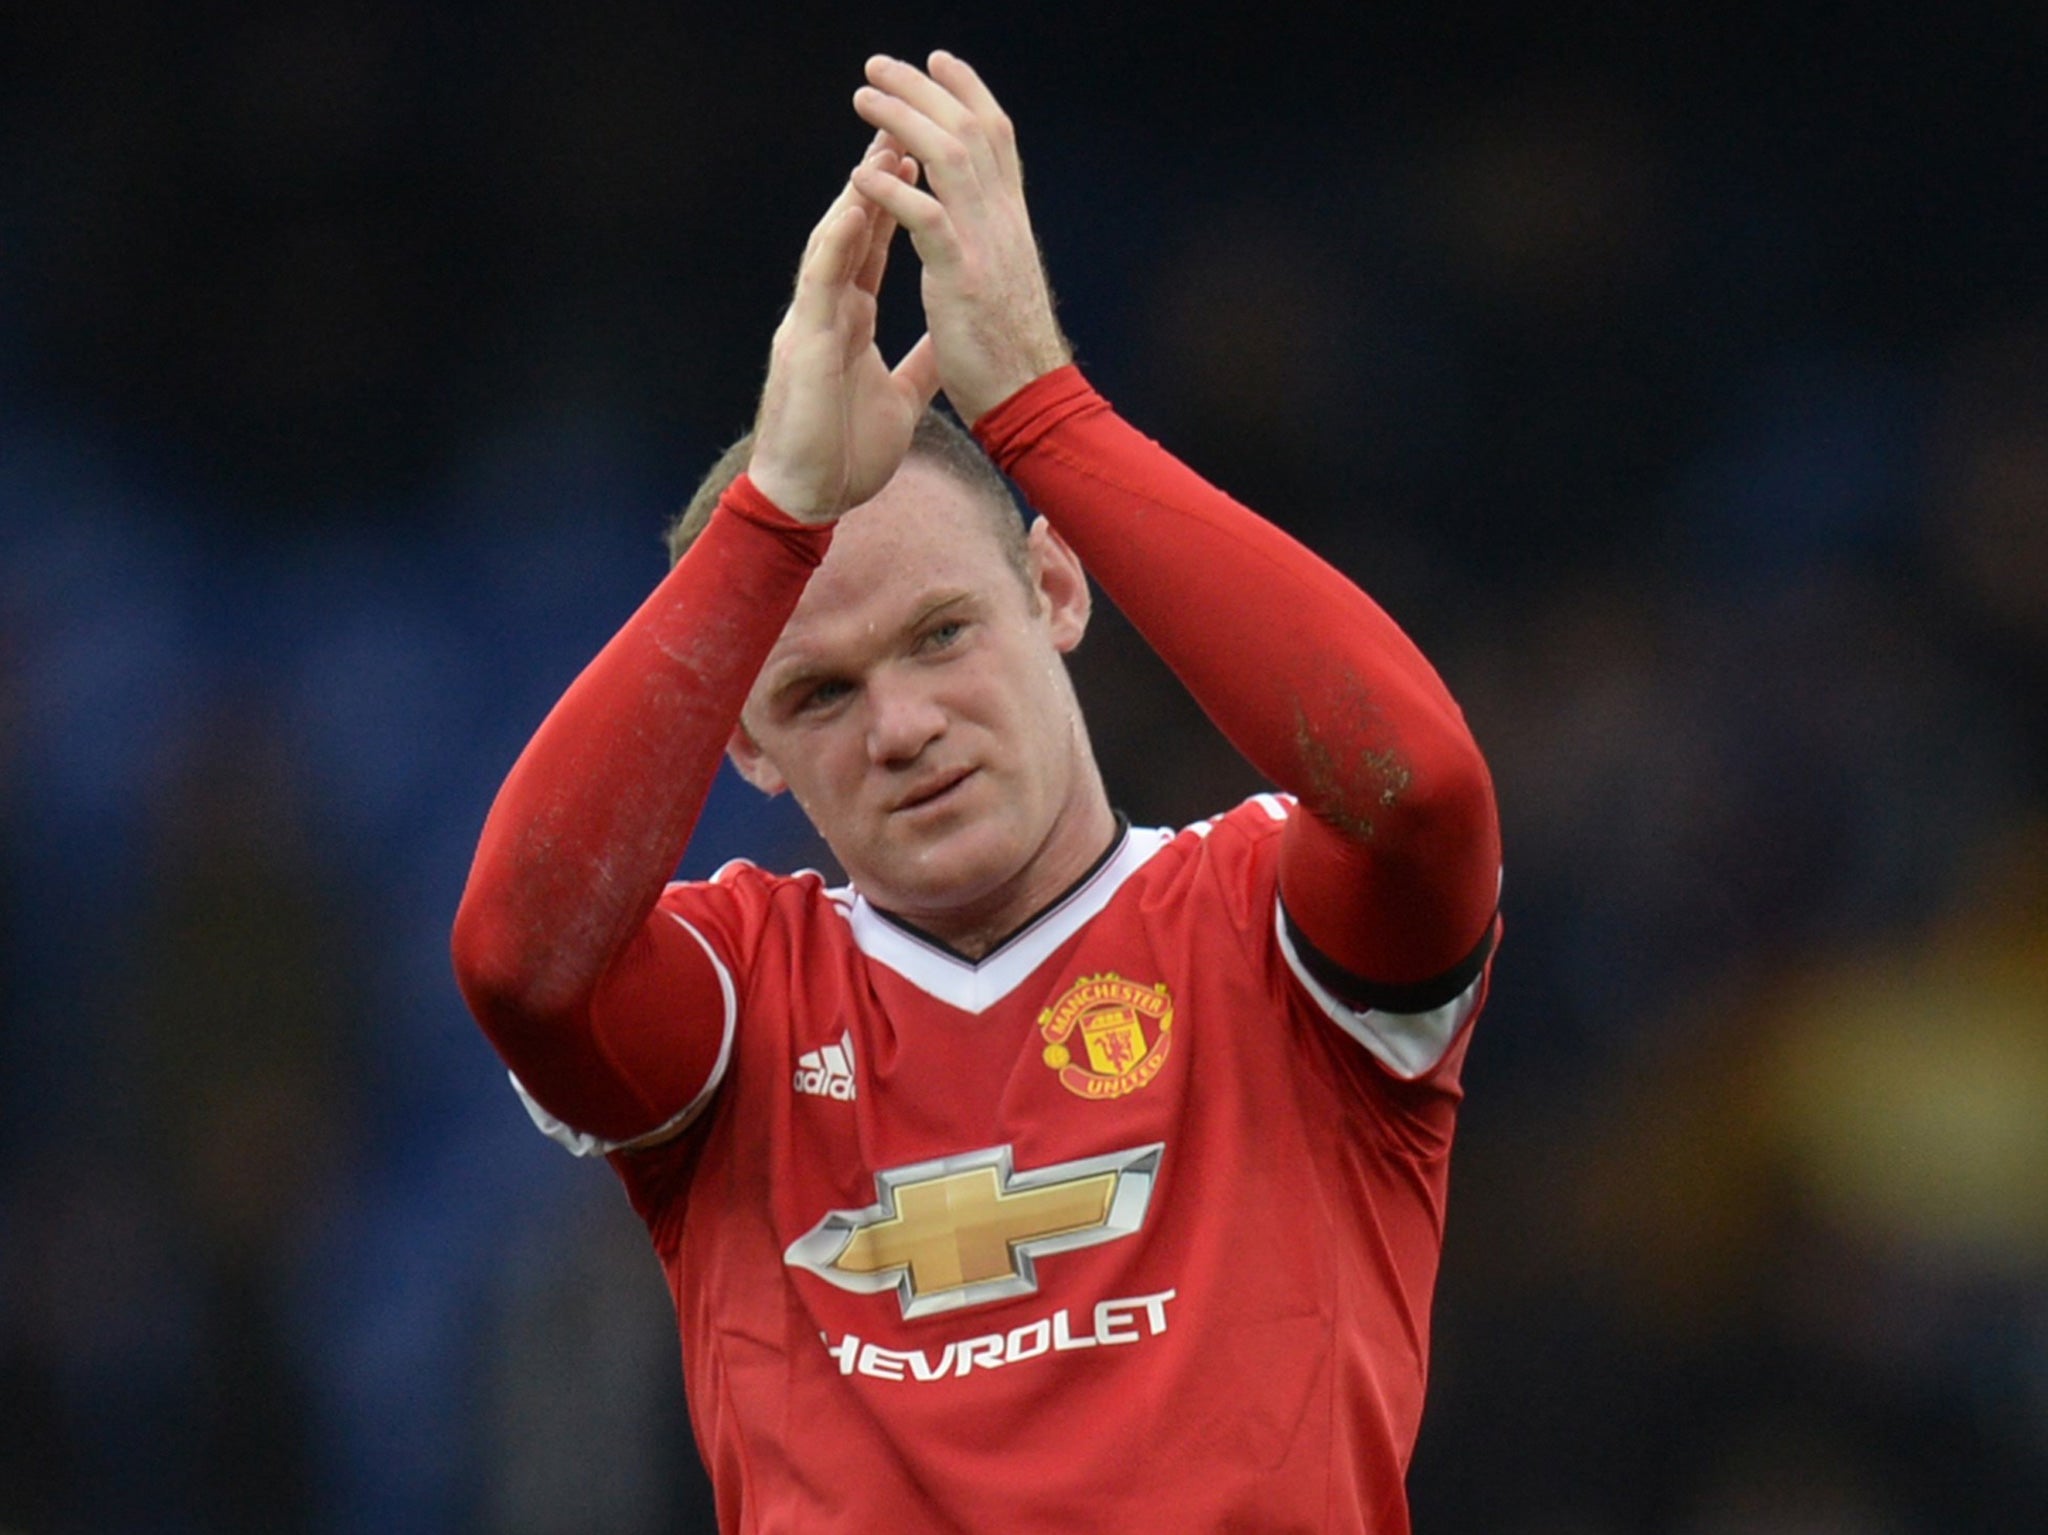 Rooney's 12 years of service at United will be celebrated on Wednesday